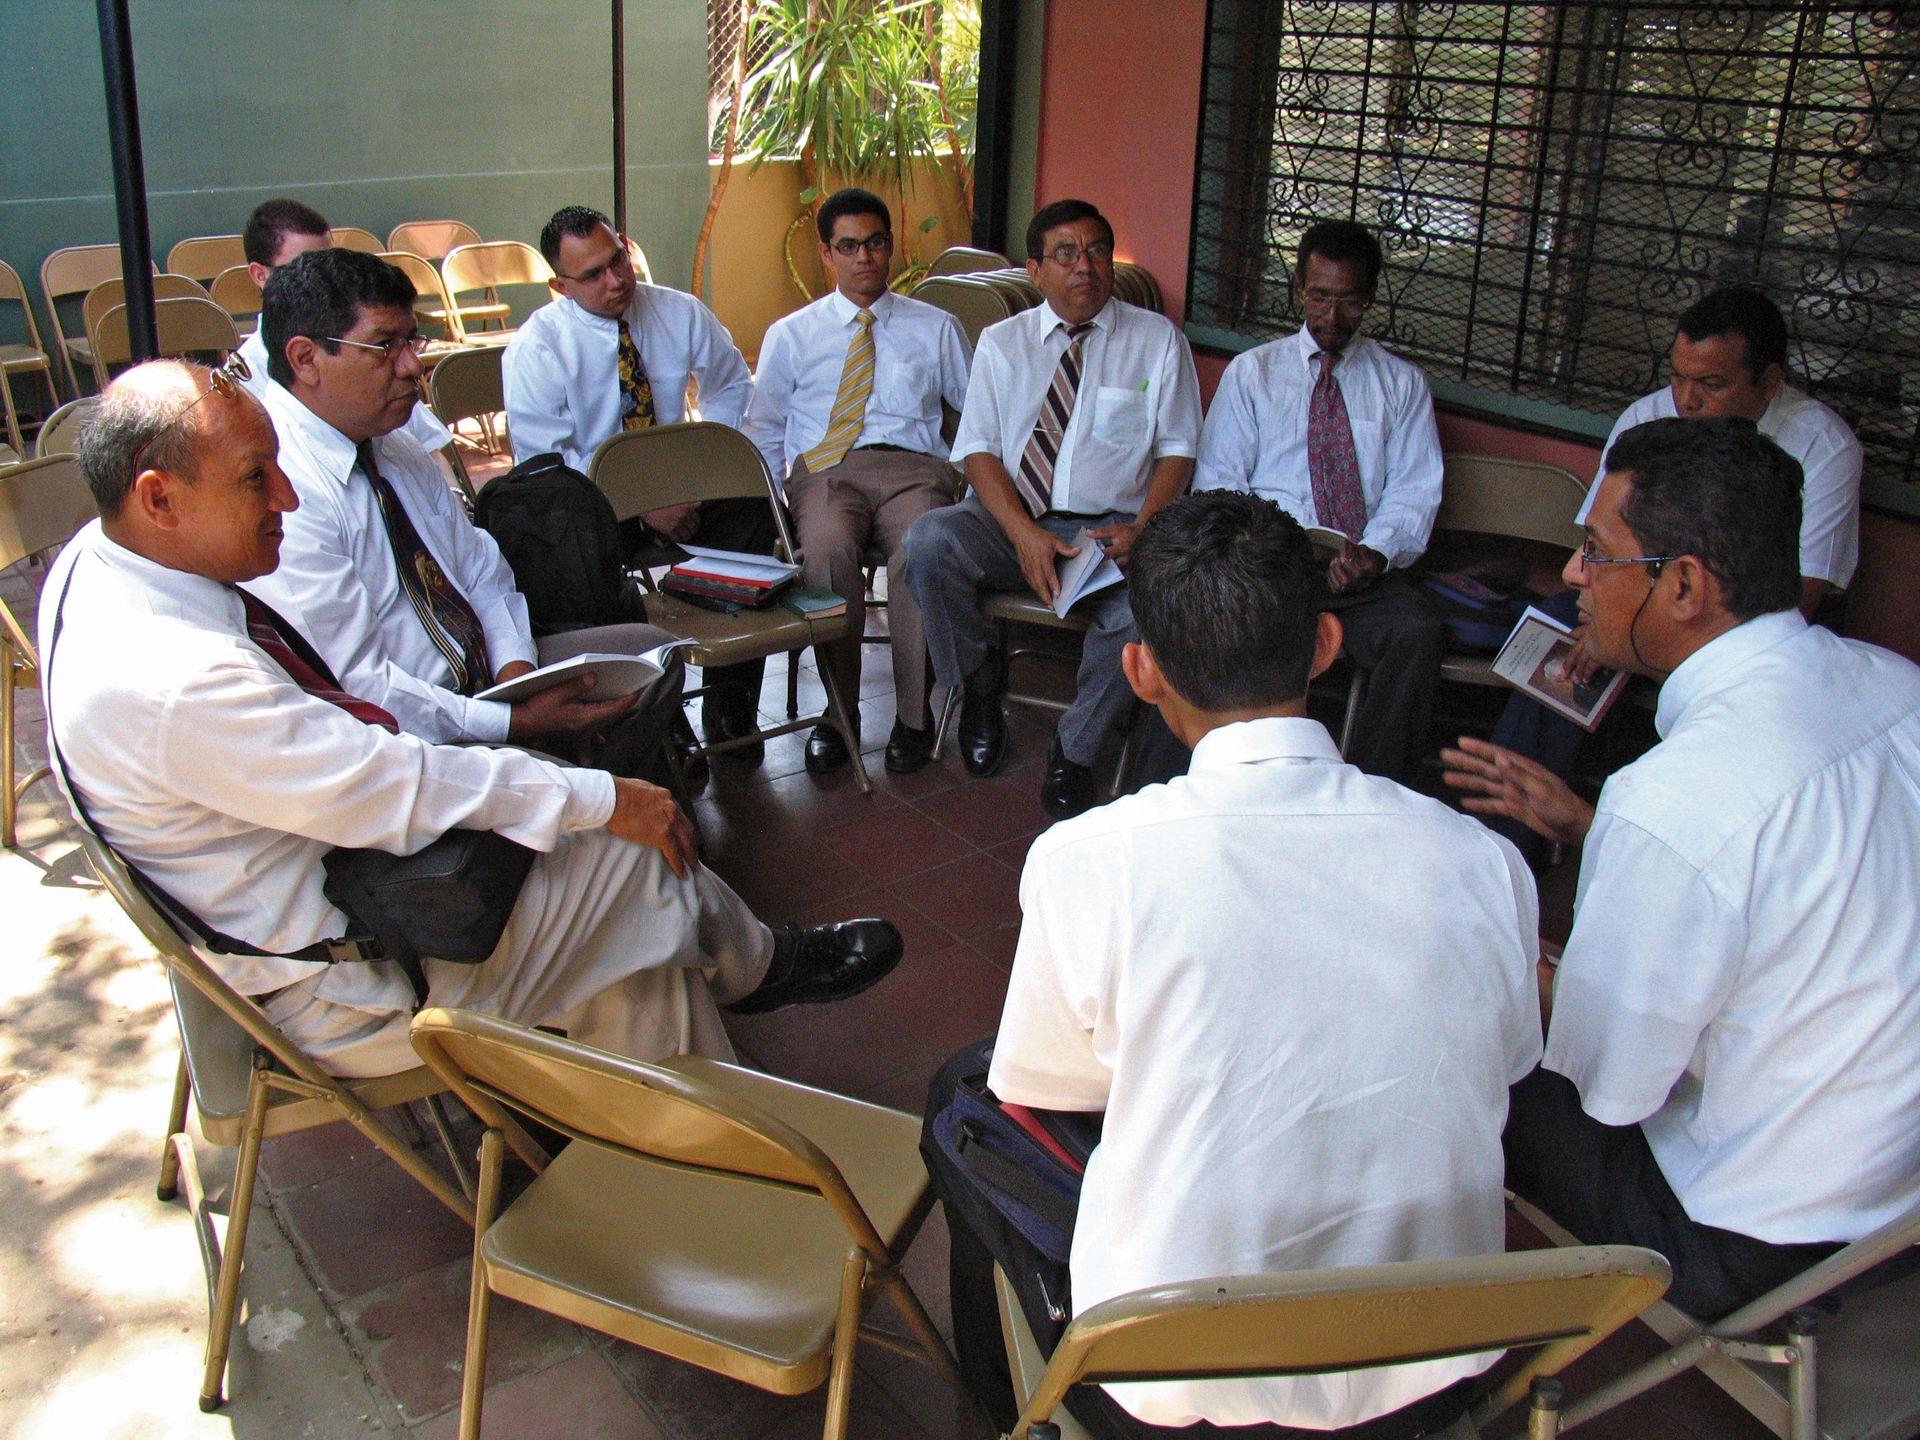 Members of an elders quorum sit in a circle to discuss teachings of the prophets.